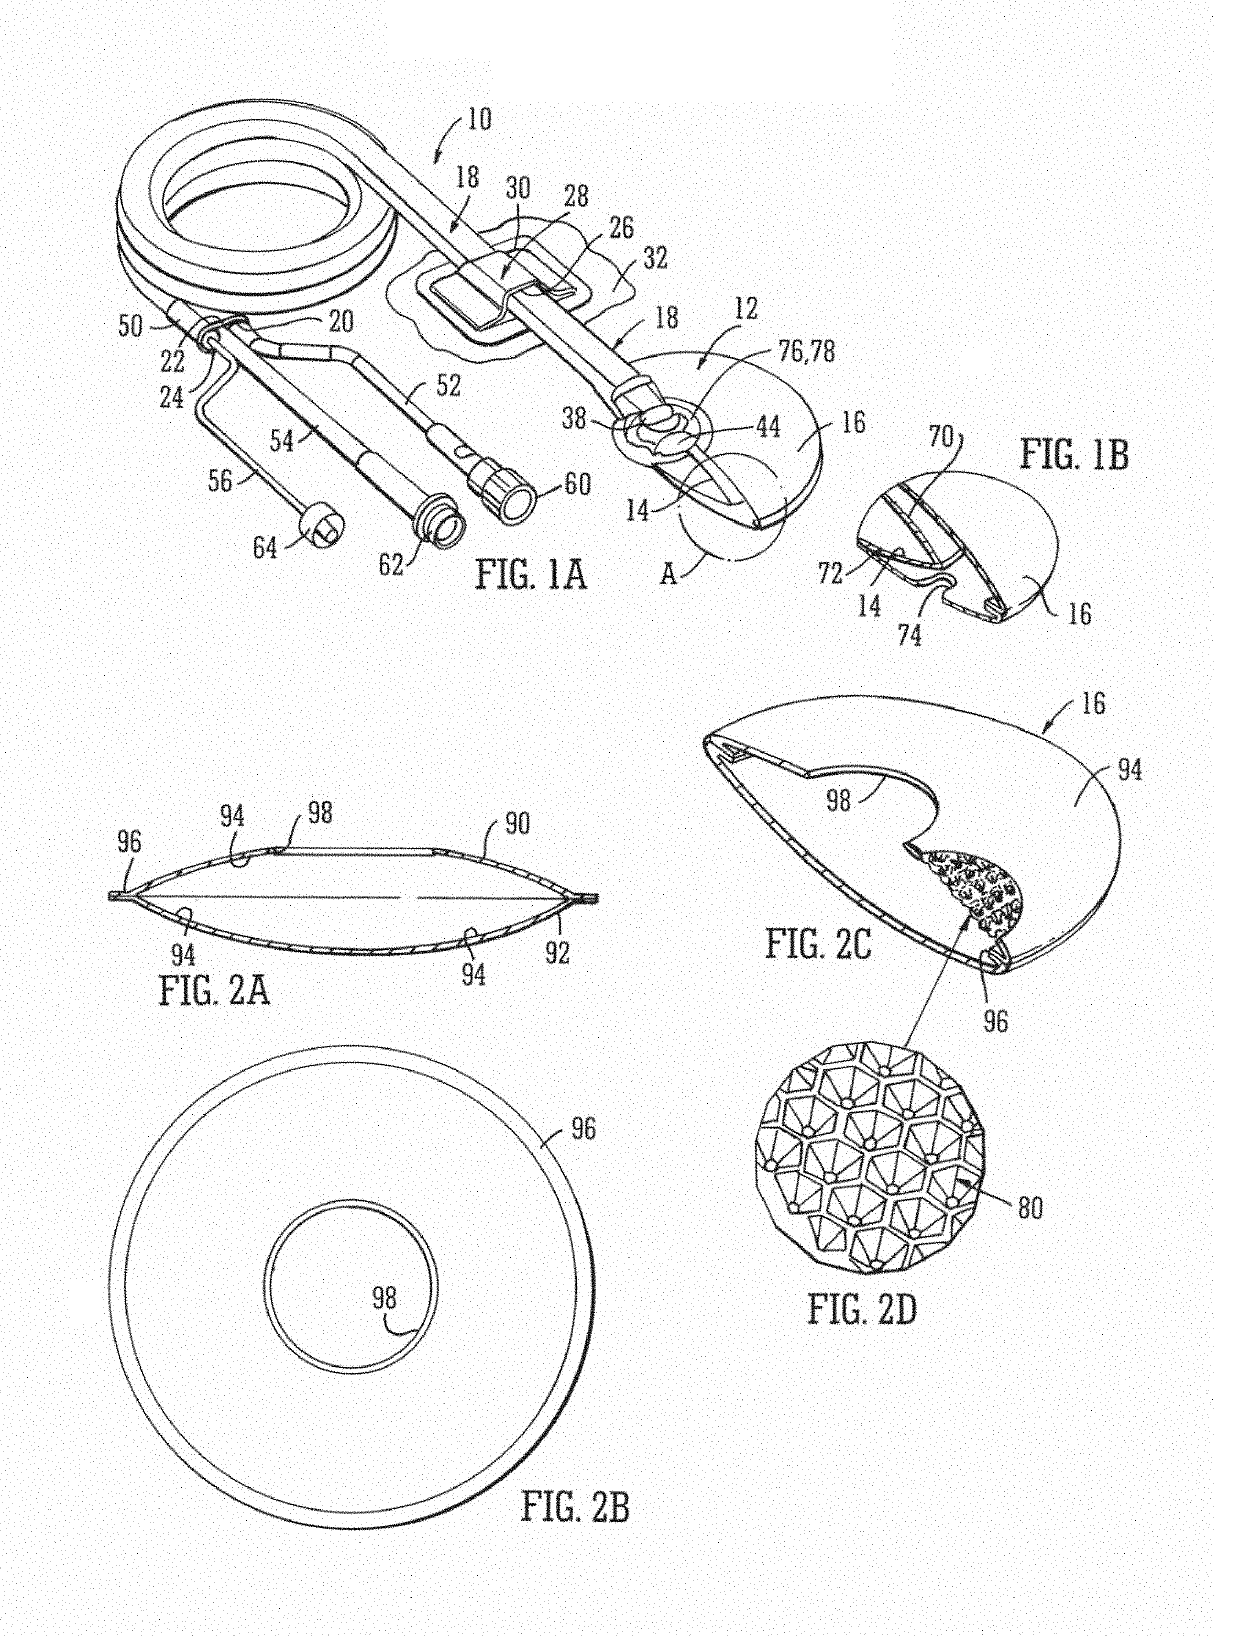 Wound filling apparatuses and methods